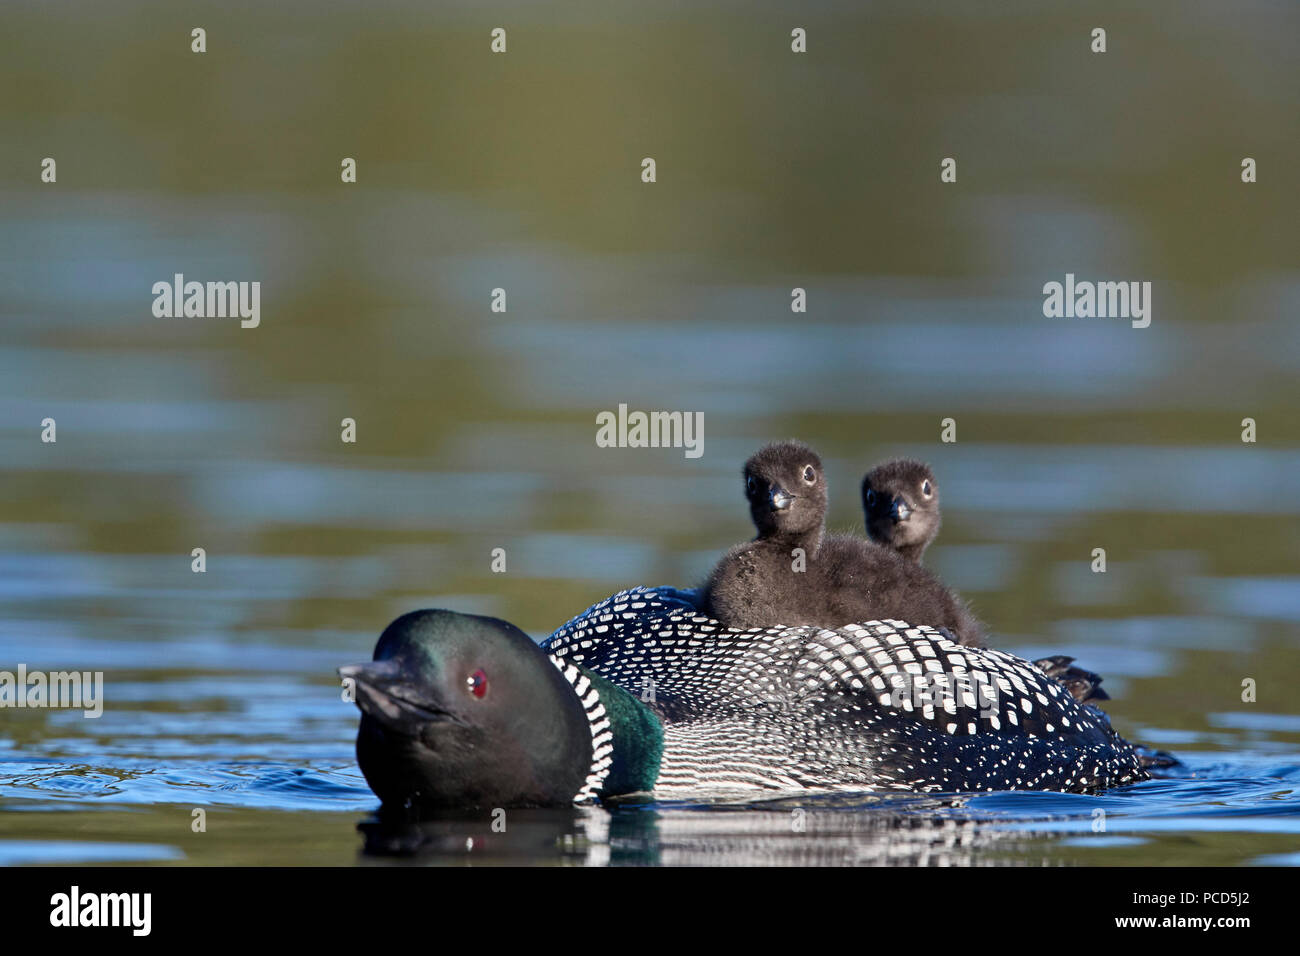 Common Loon (Gavia immer) adult with two chicks on its back, Lac Le Jeune Provincial Park, British Columbia, Canada, North America Stock Photo